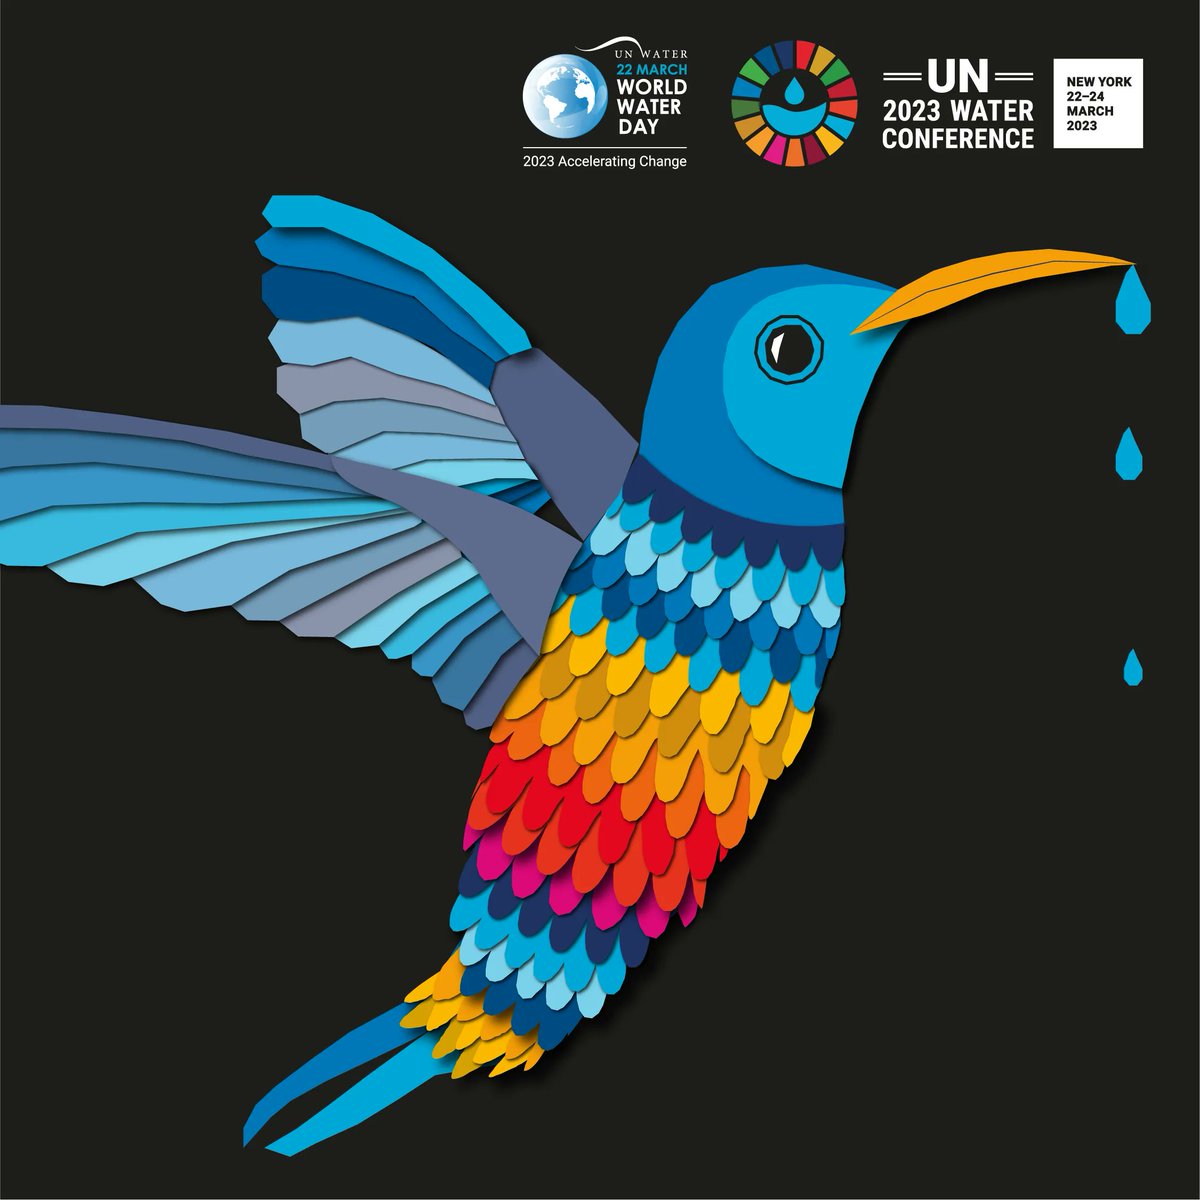 Ahead of #WorldWaterDay on 22 March, @UN_Water has ideas on how to help address the world’s major water and sanitation crisis. bit.ly/3w1hK3w #GlobalGoals